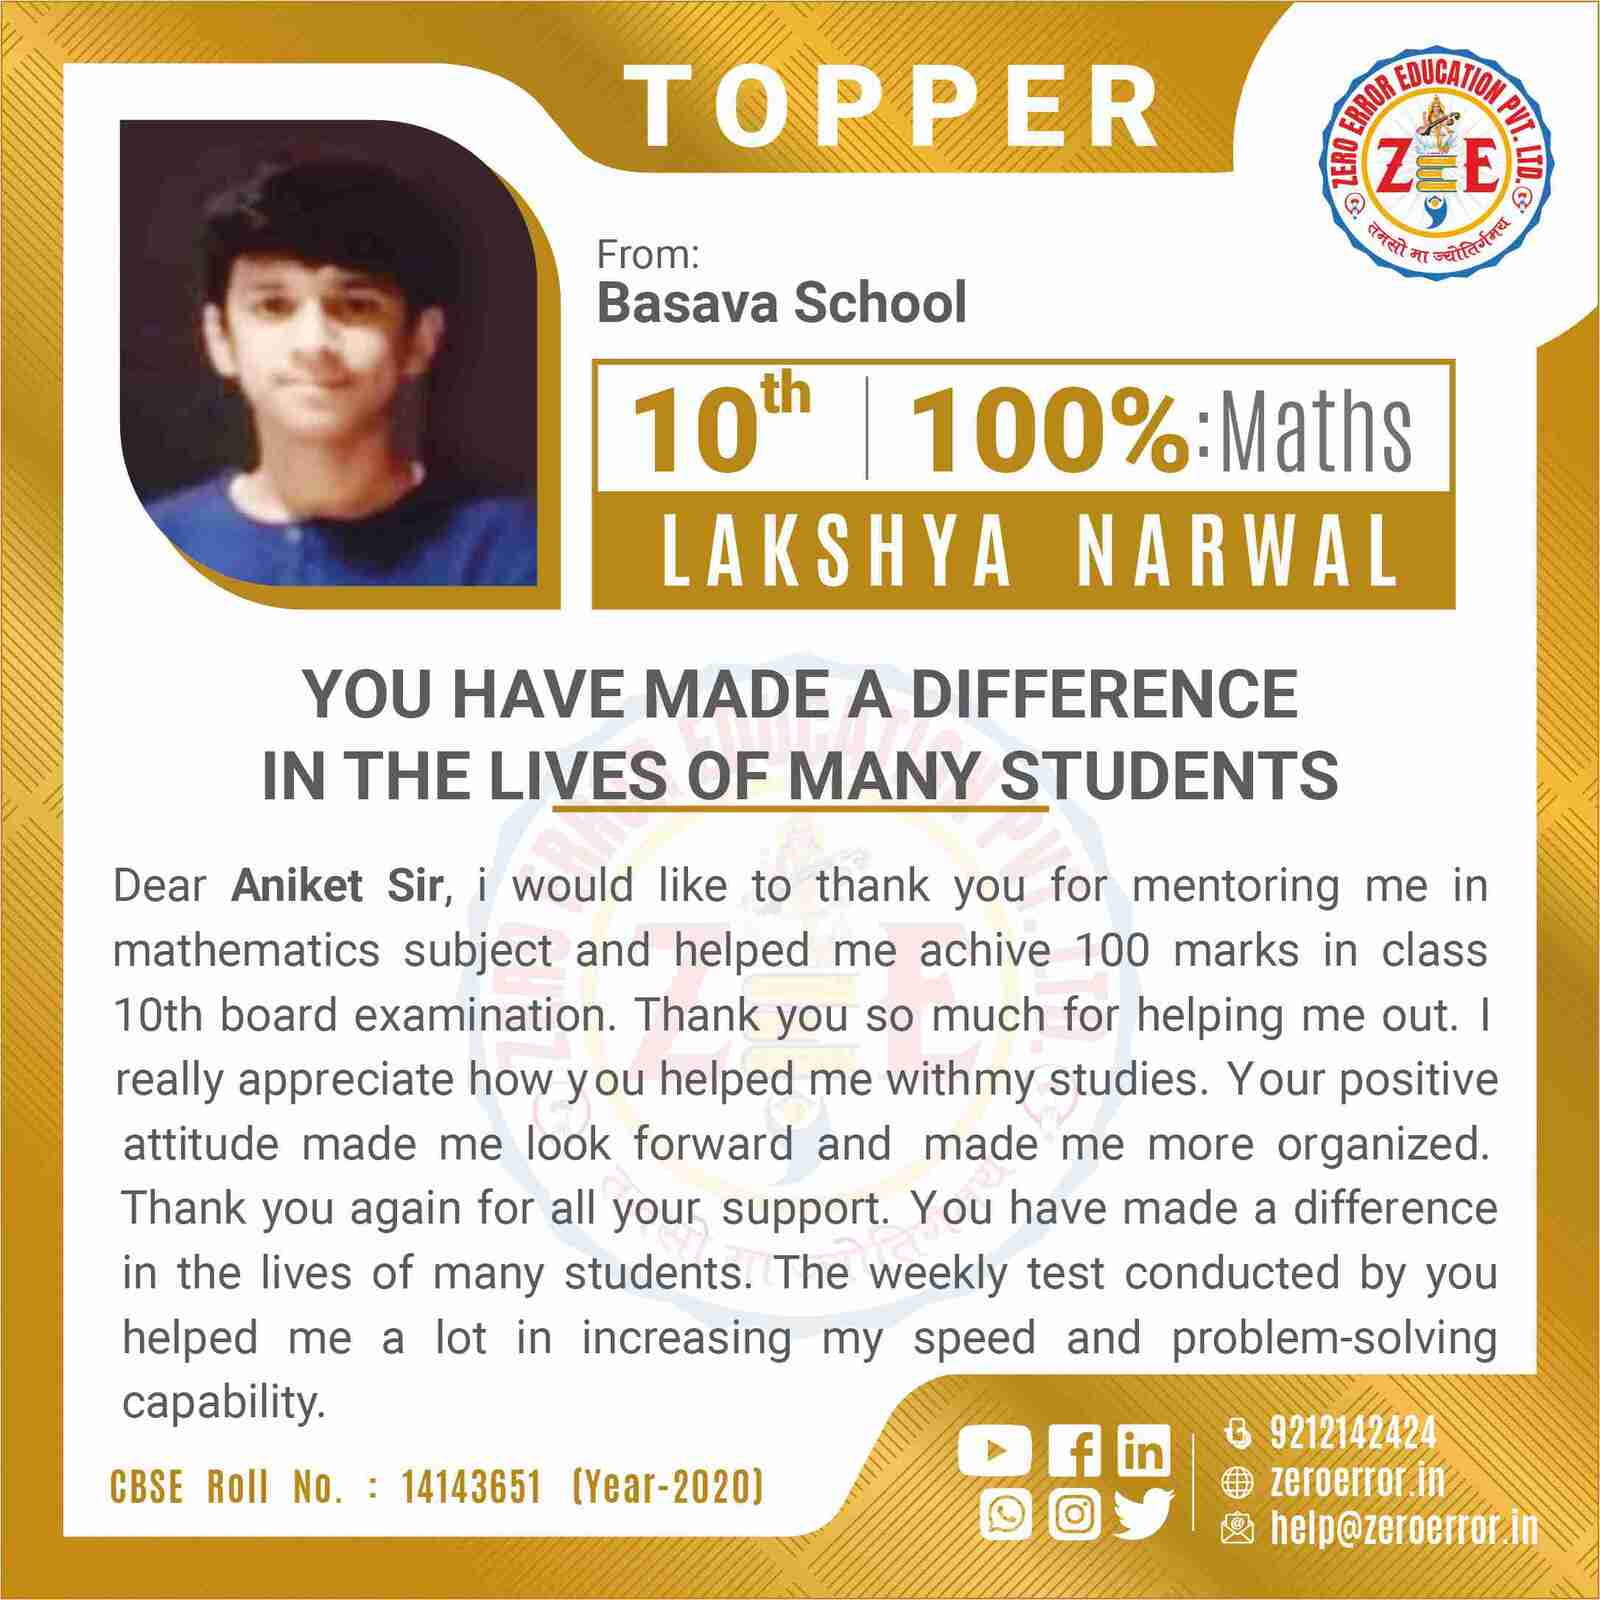 Certificate of achievement awarded by Zerorror.in to Lakshya Narwal for scoring 100% in 10th board Mathematics exam, showcasing academic excellence and dedication.